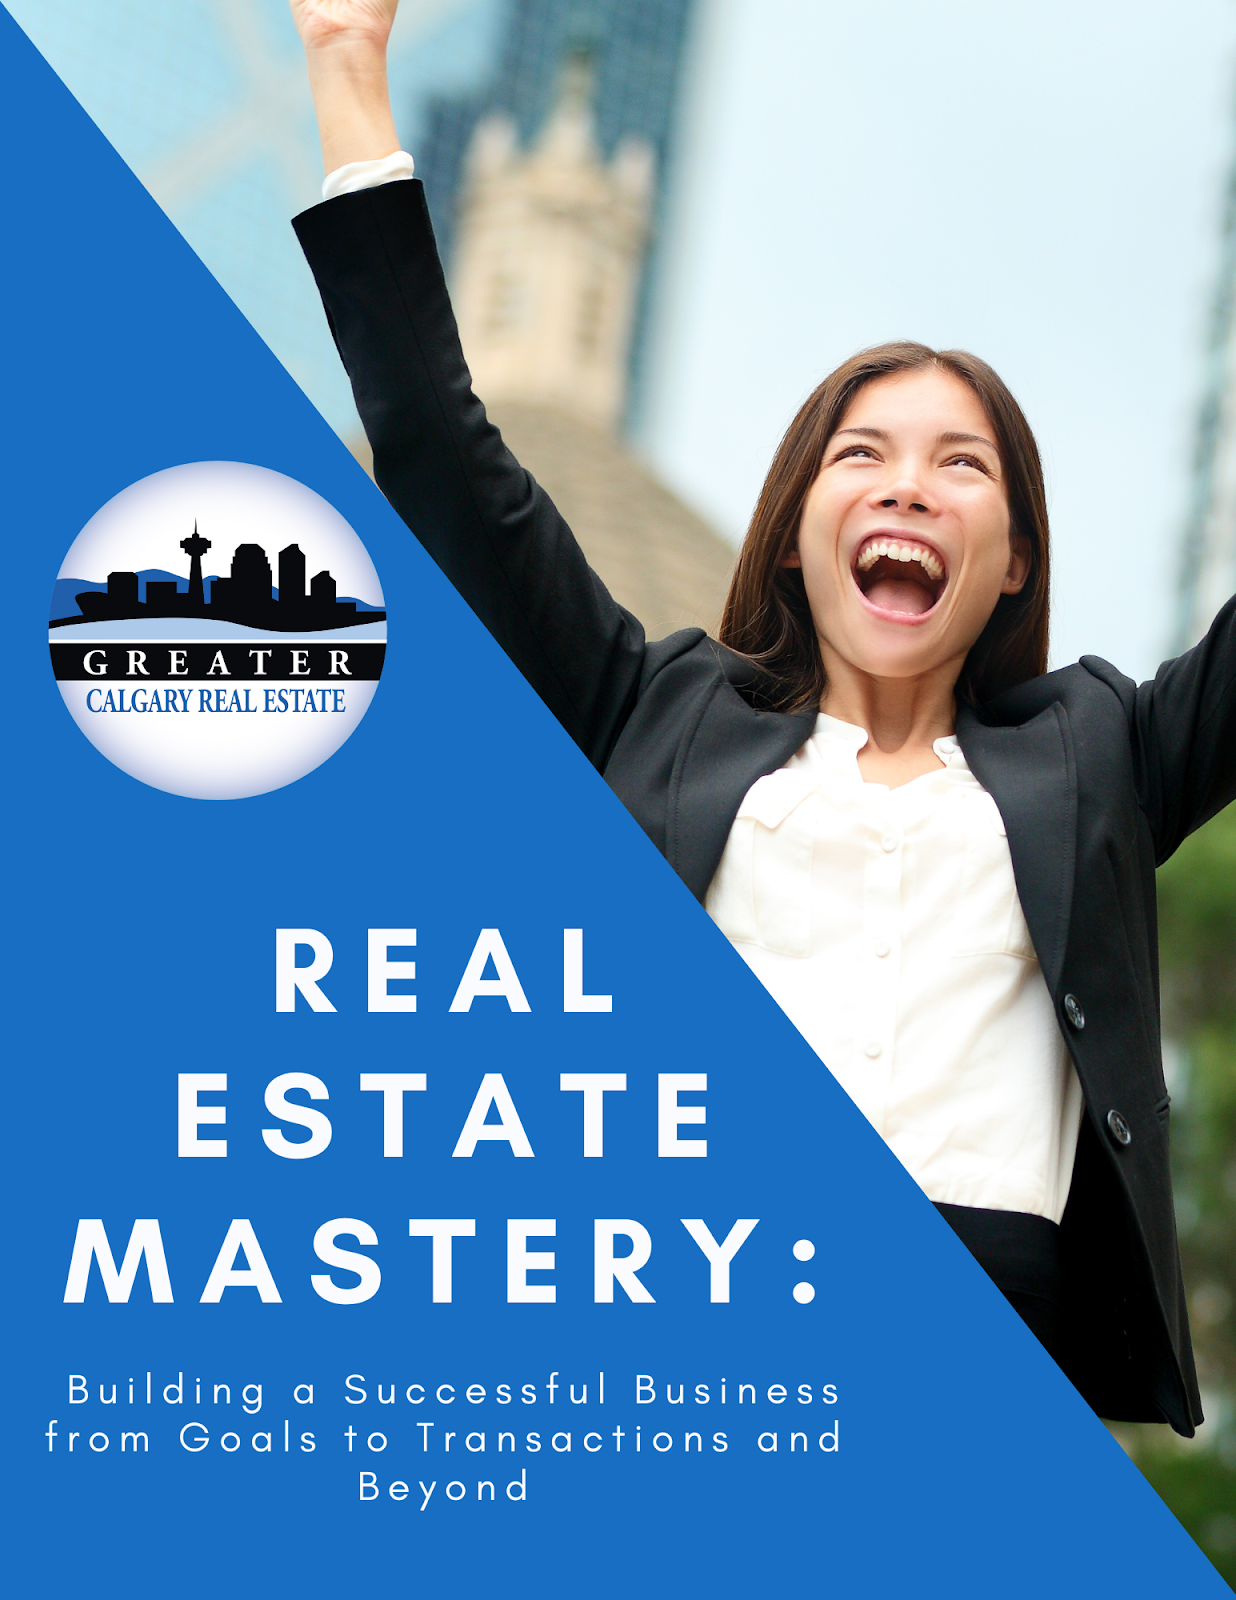 Real Estate Mastery